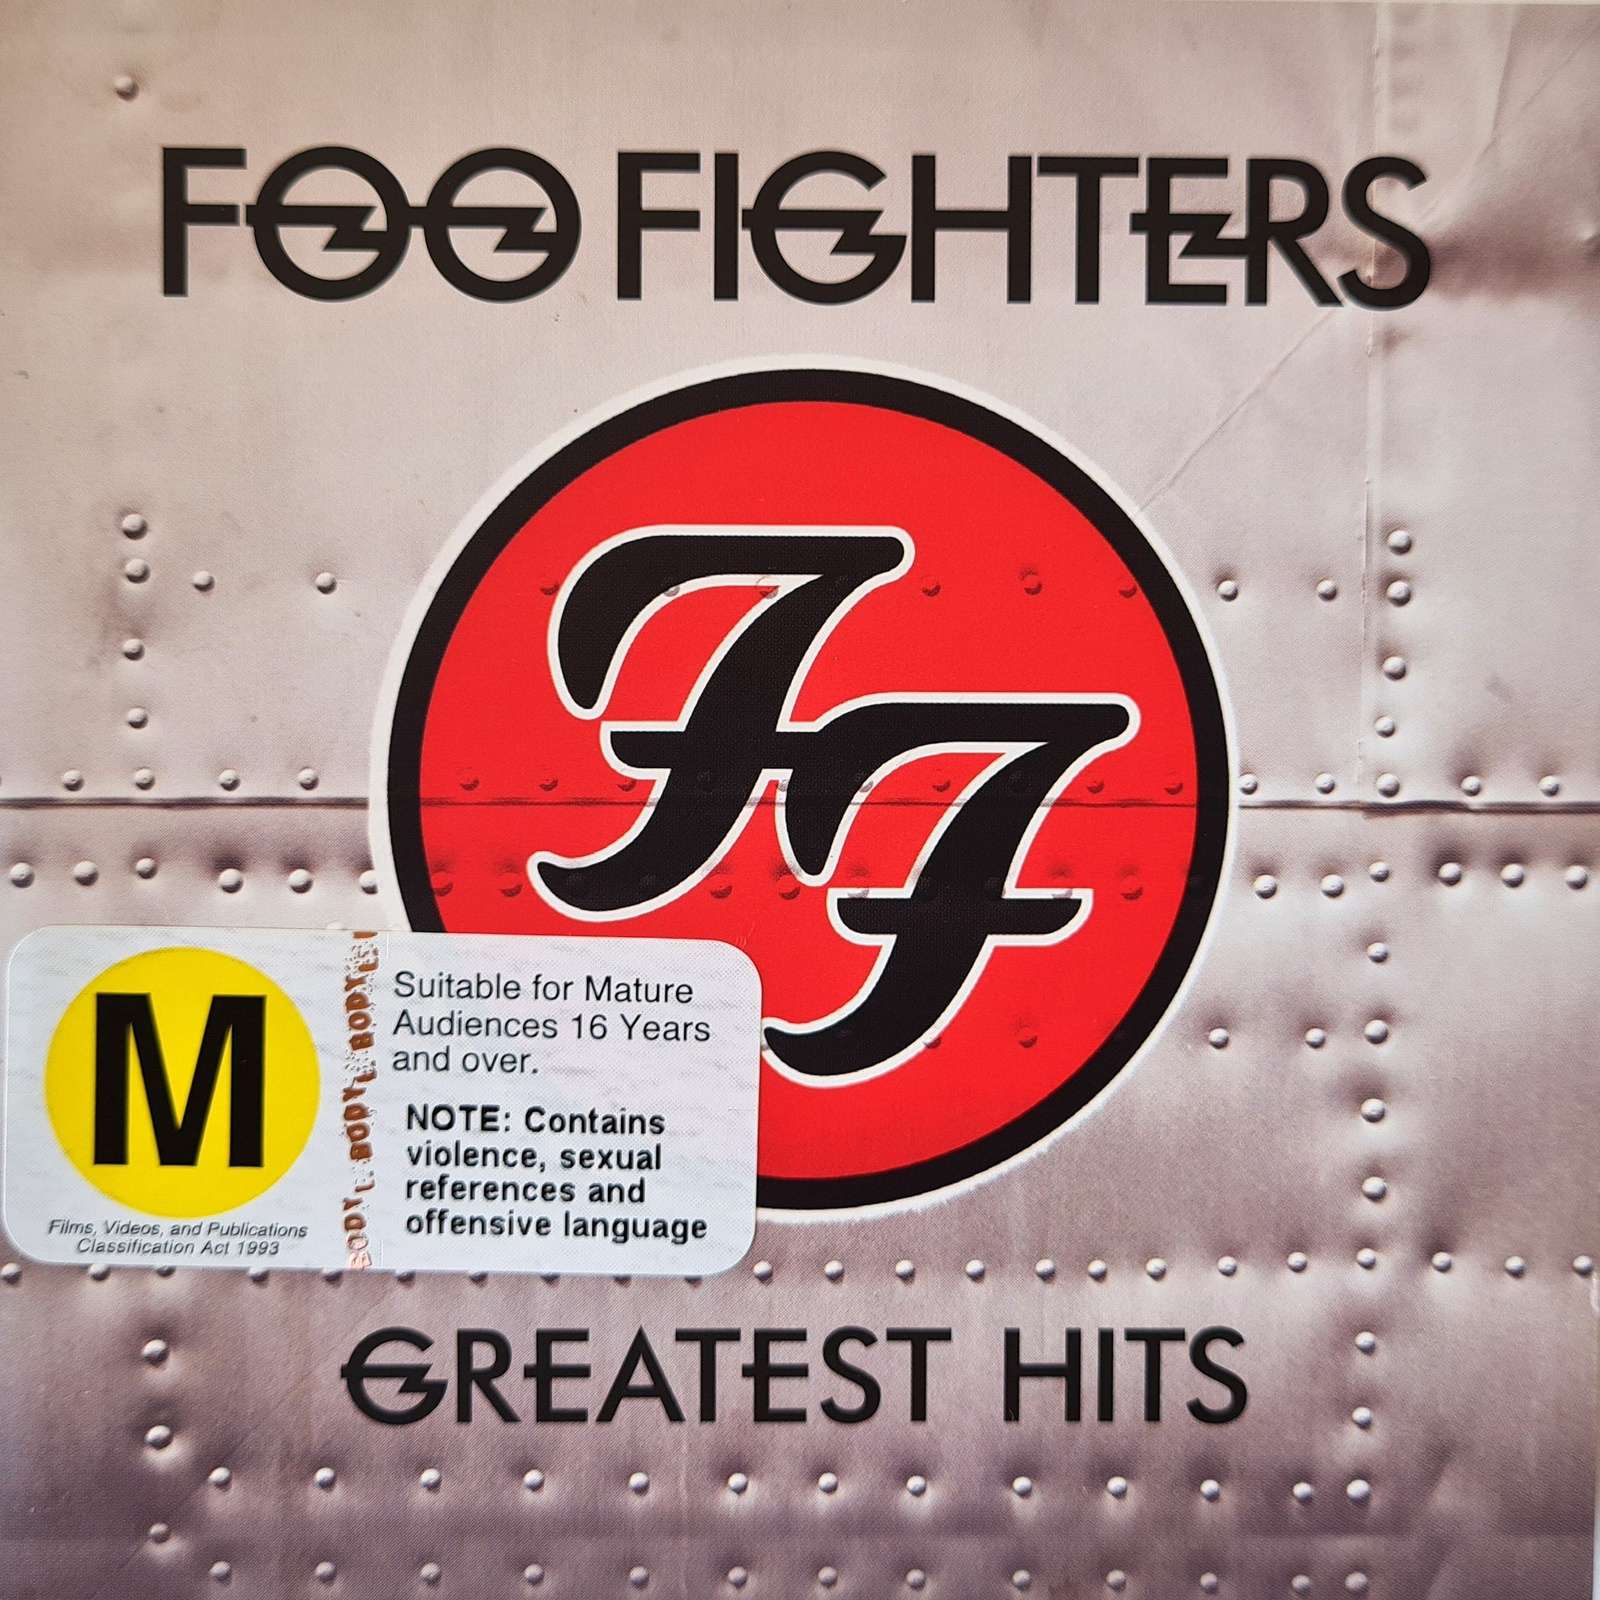 Foo Fighters - Greatest Hits - Limited Edition (CD) + DVD